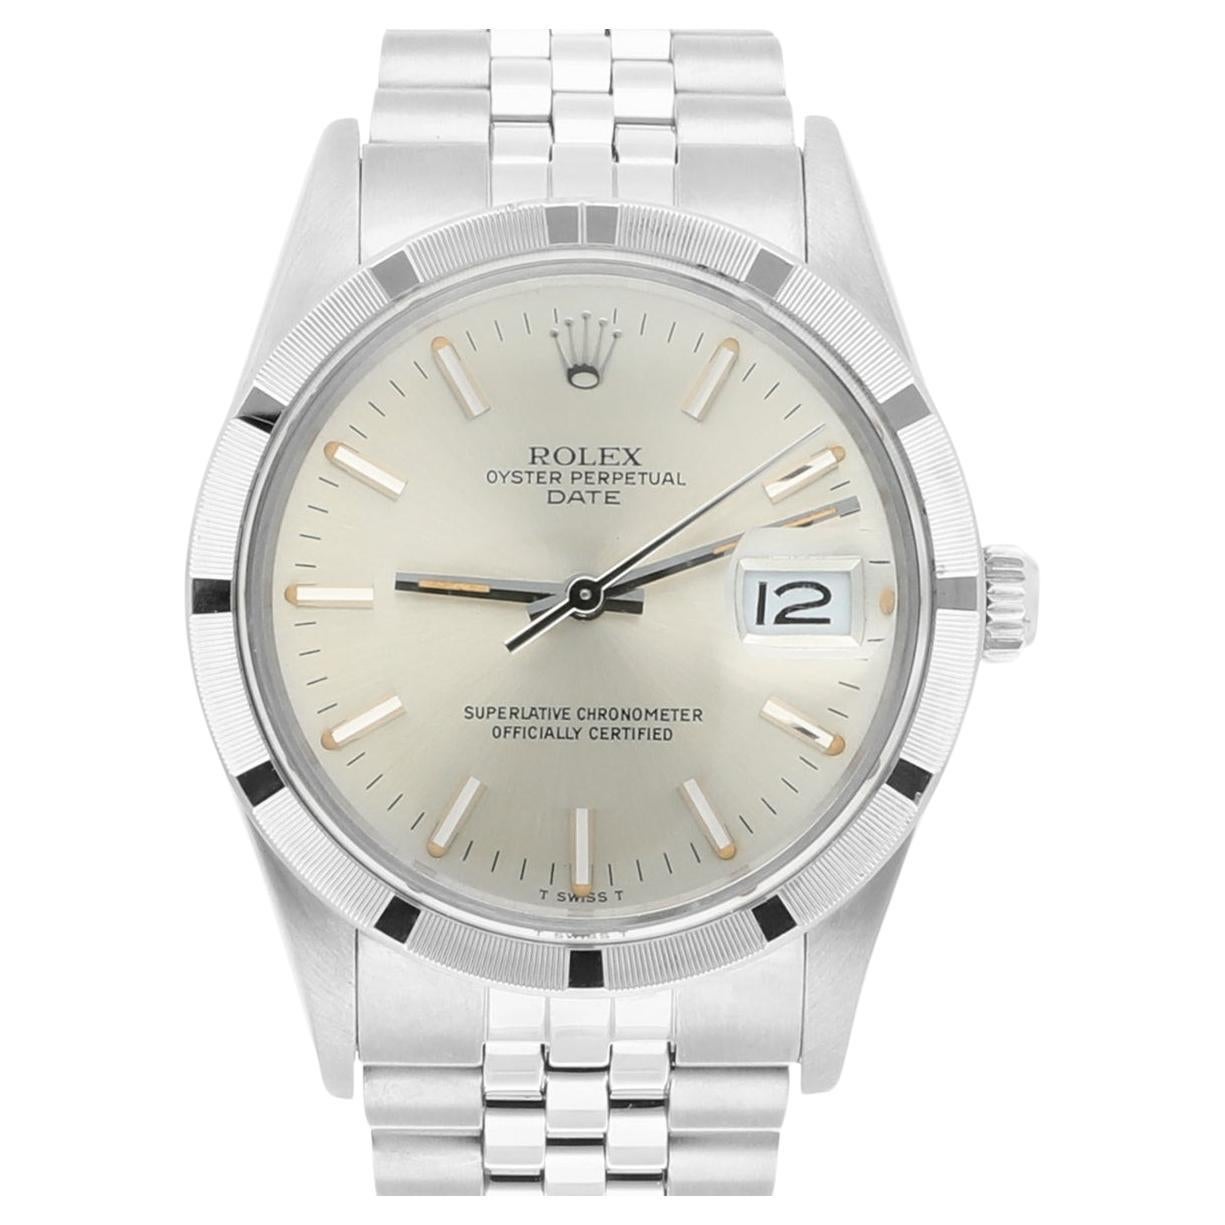 Rolex Oyster Perpetual Date Stainless Steel Watch Jubilee Silver Index Dial 1501